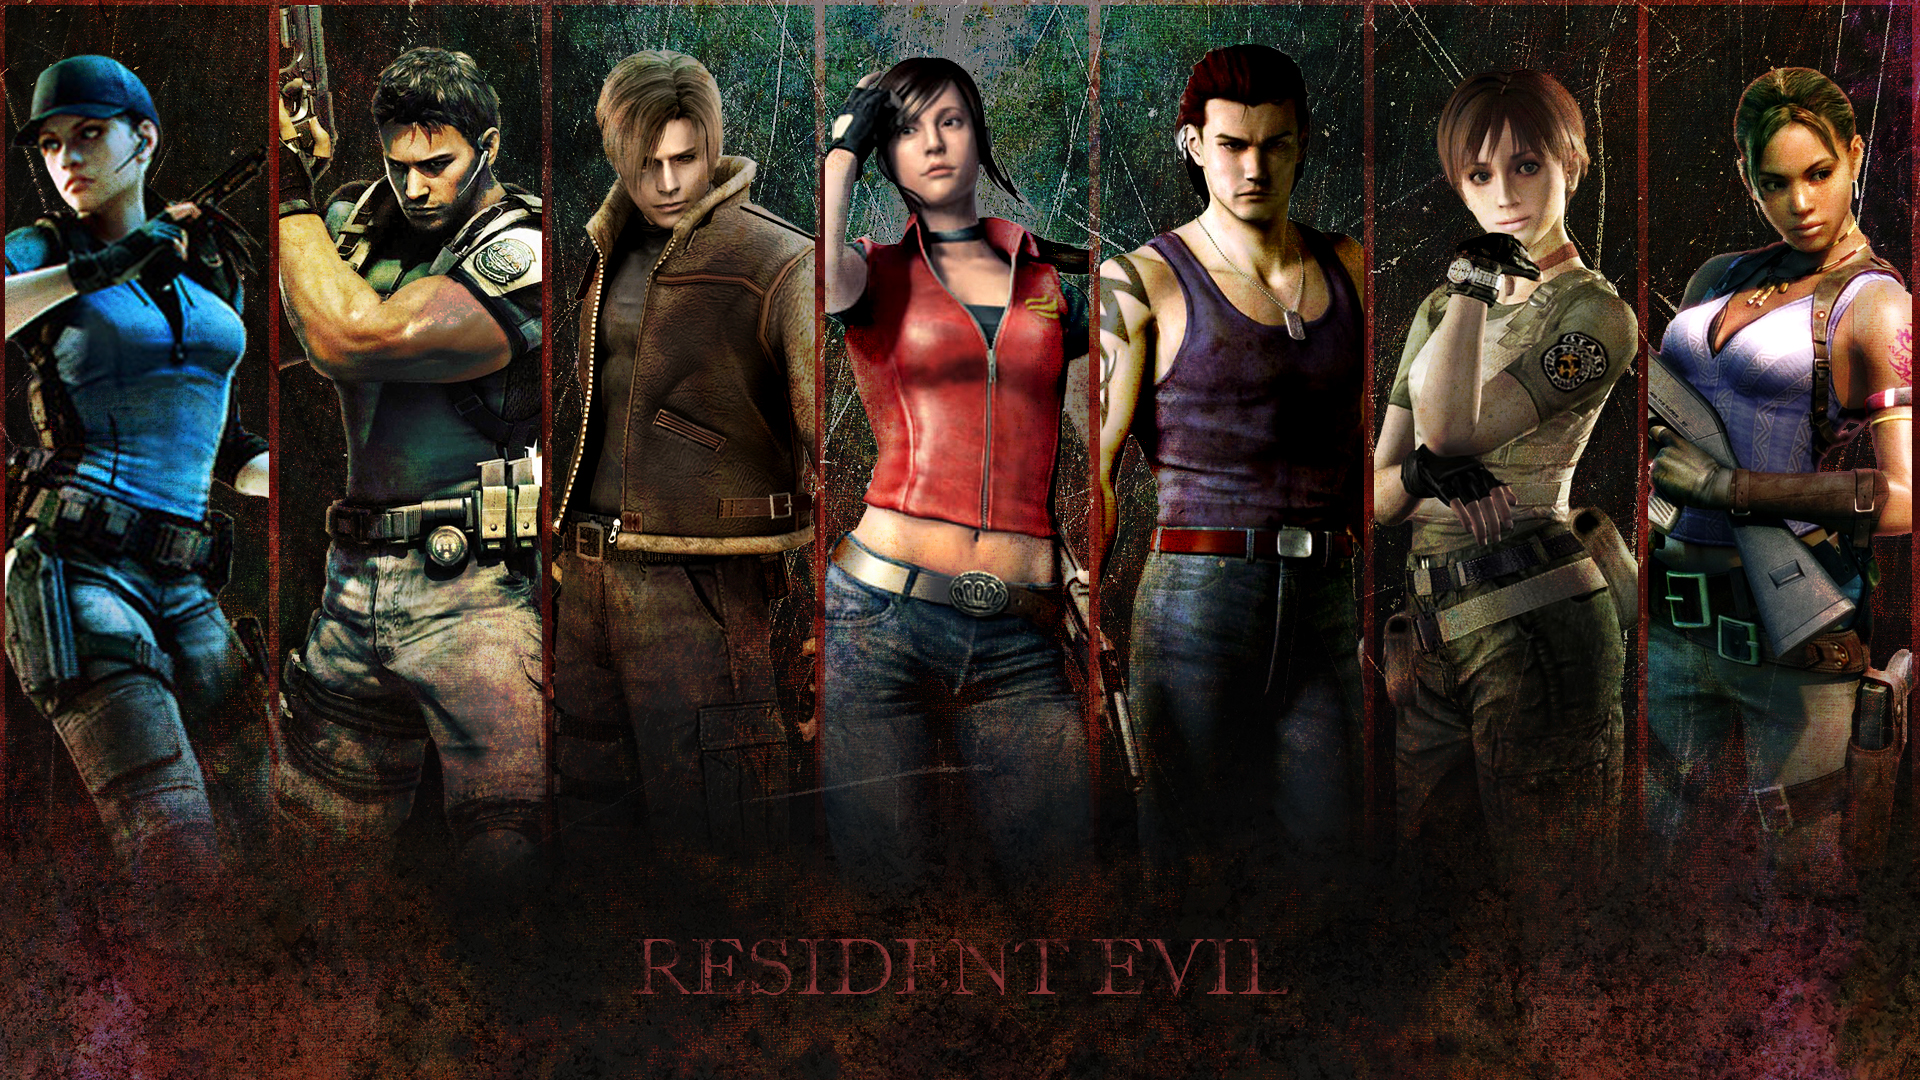 A Resident Evil TV Series Is on the Way, Based on the Games